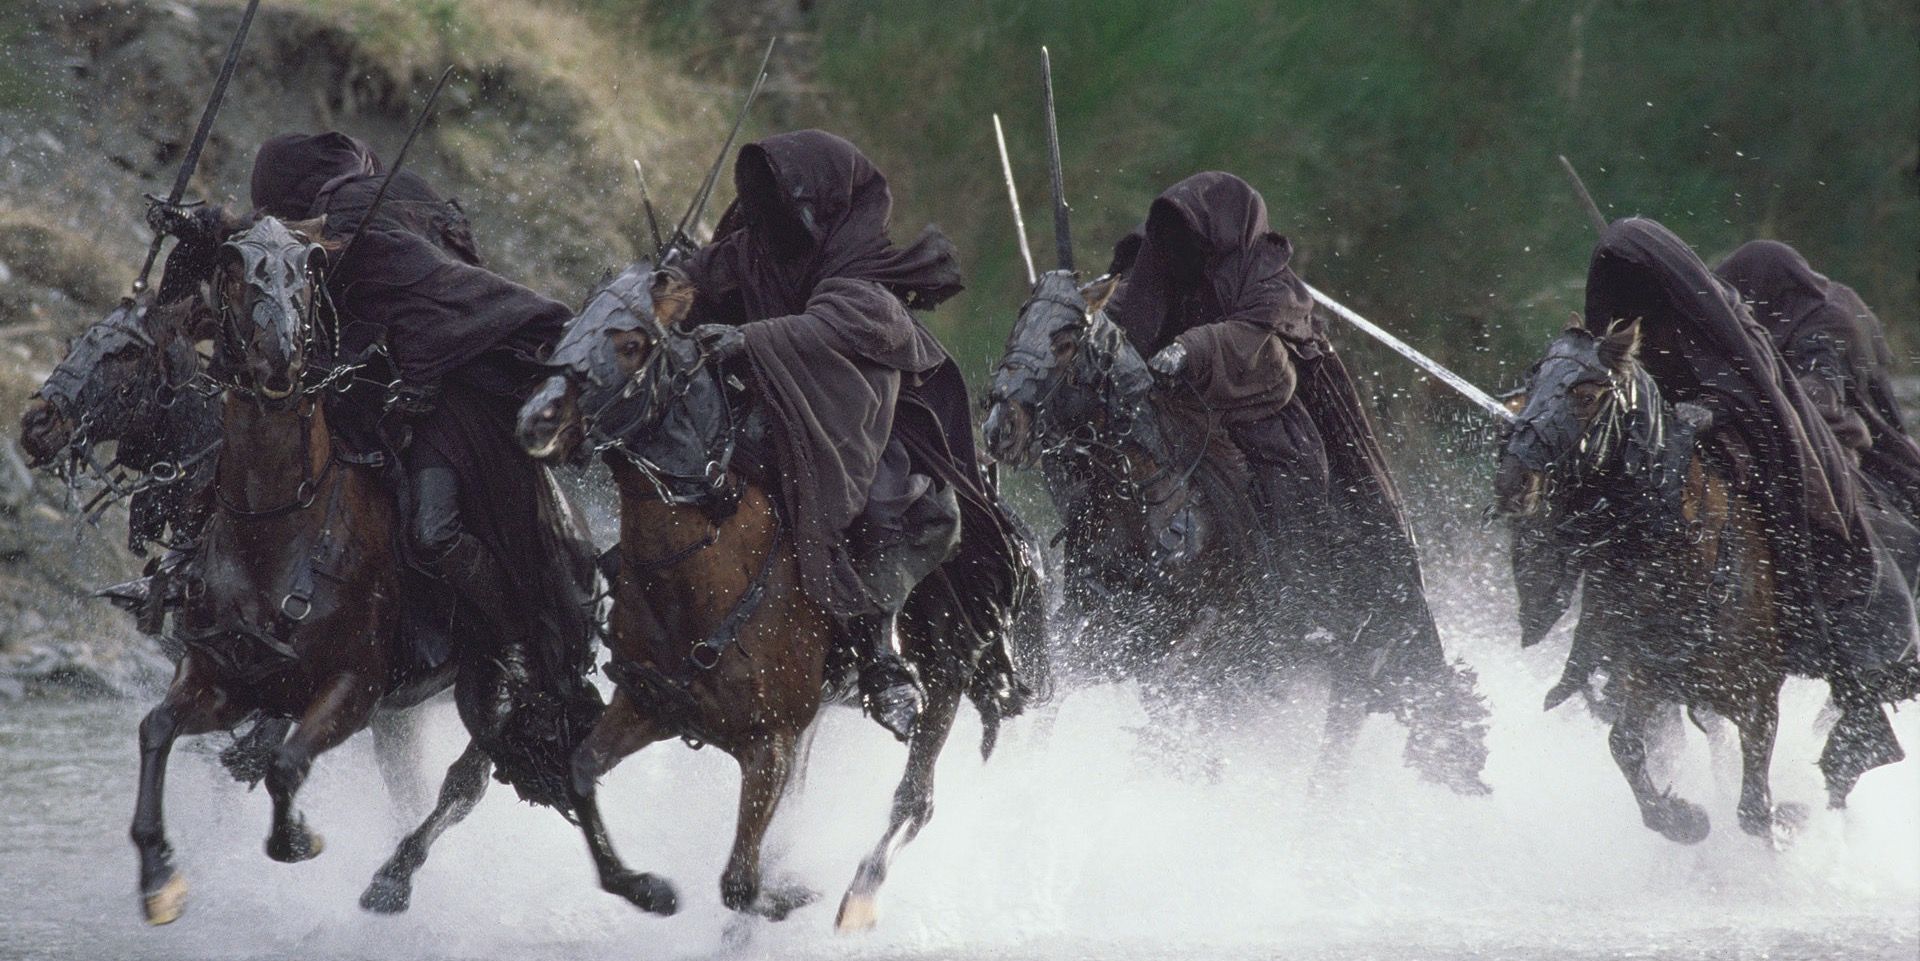 The Nazgul LOTR Video Games